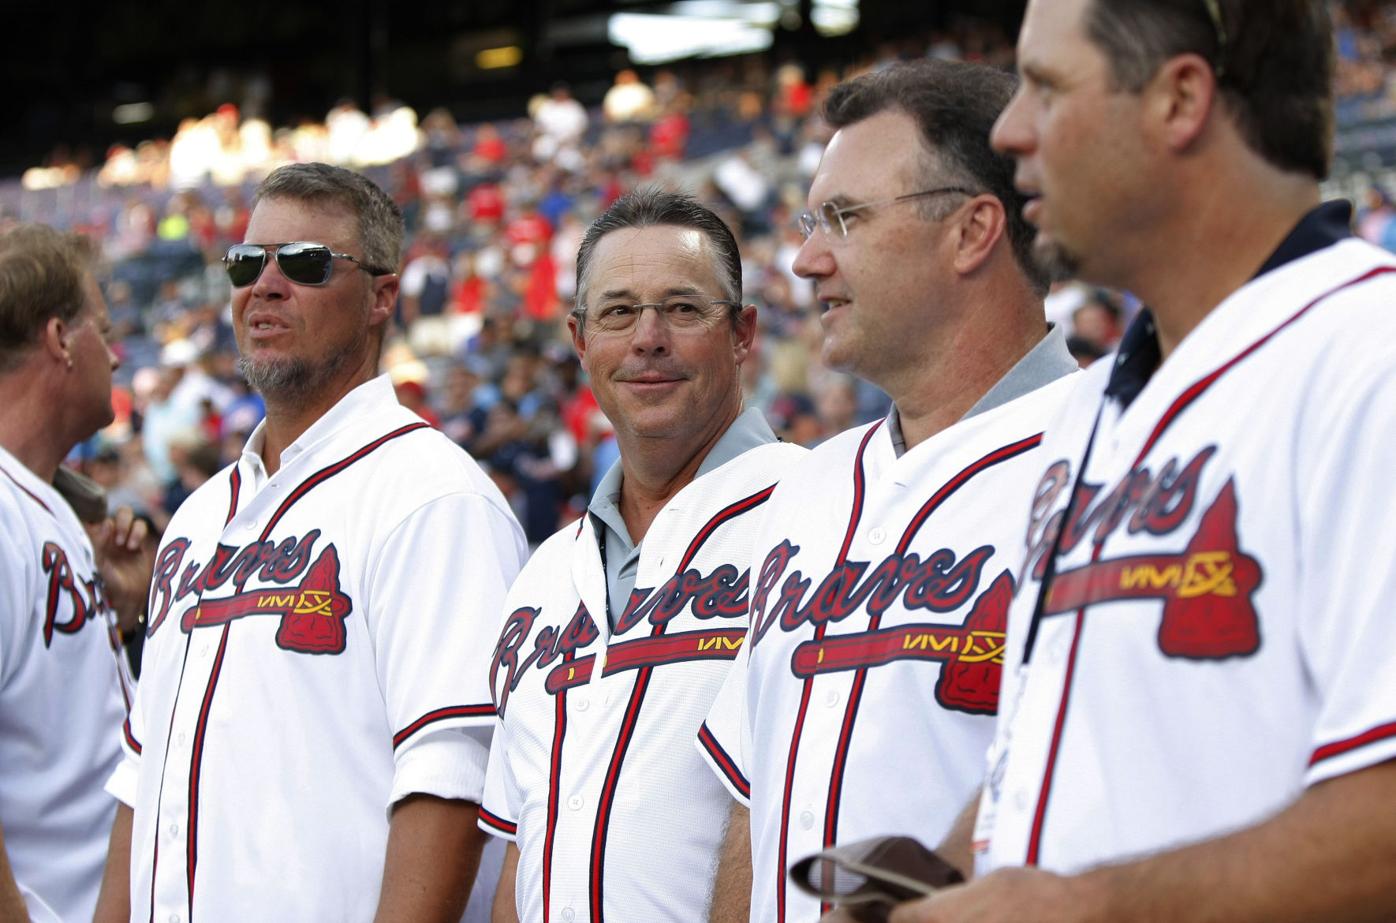 Braves legend Greg Maddux vows to donate to virus victims